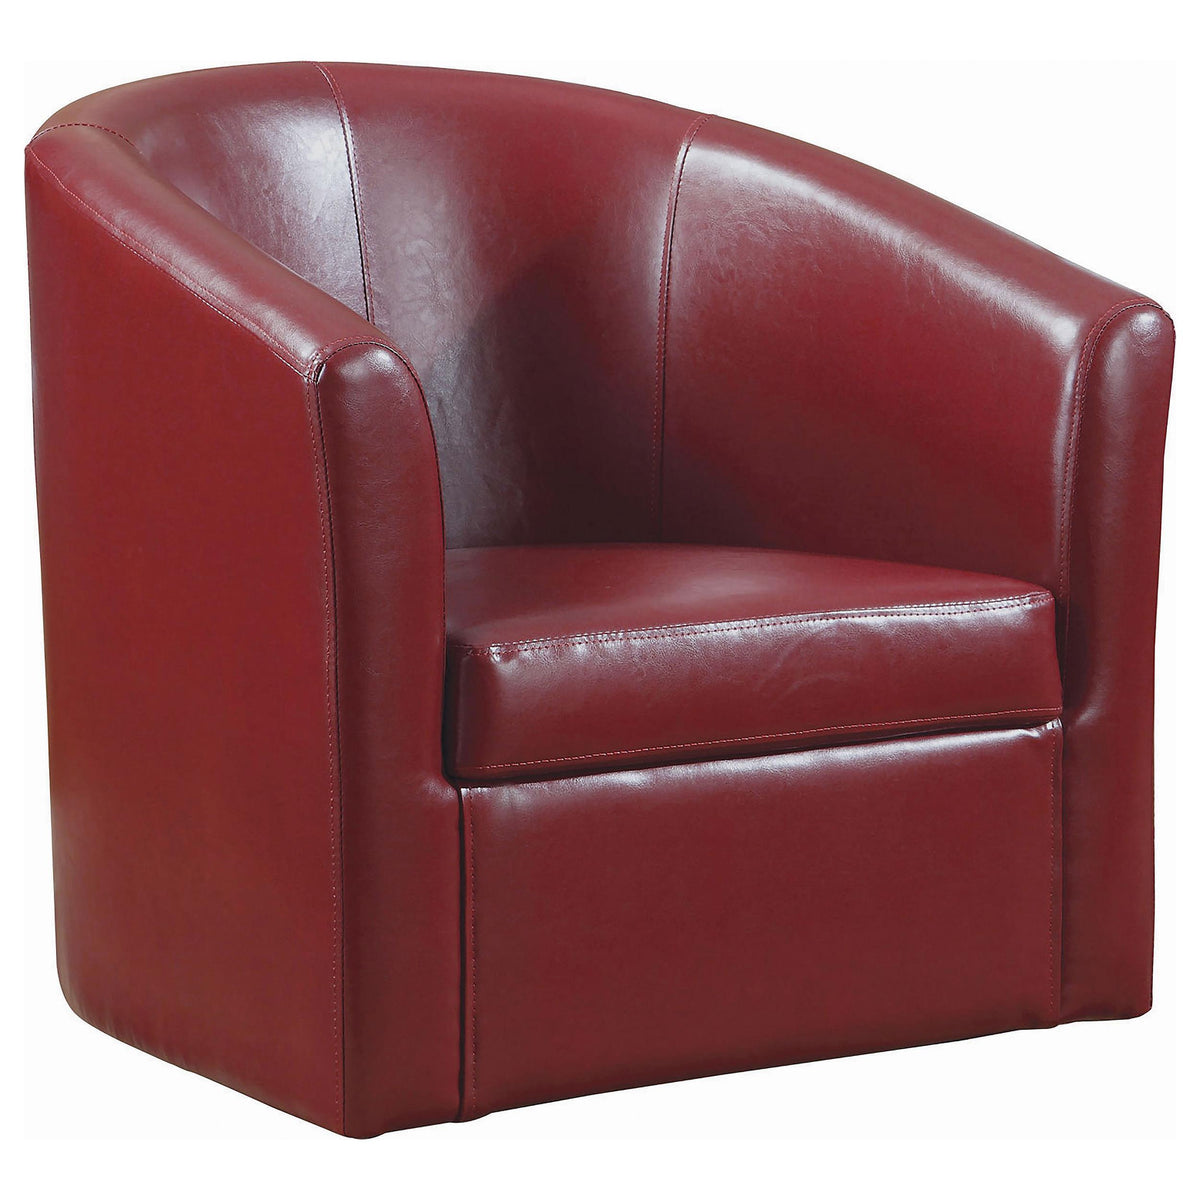 Turner Upholstery Sloped Arm Accent Swivel Chair Red Turner Upholstery Sloped Arm Accent Swivel Chair Red Half Price Furniture